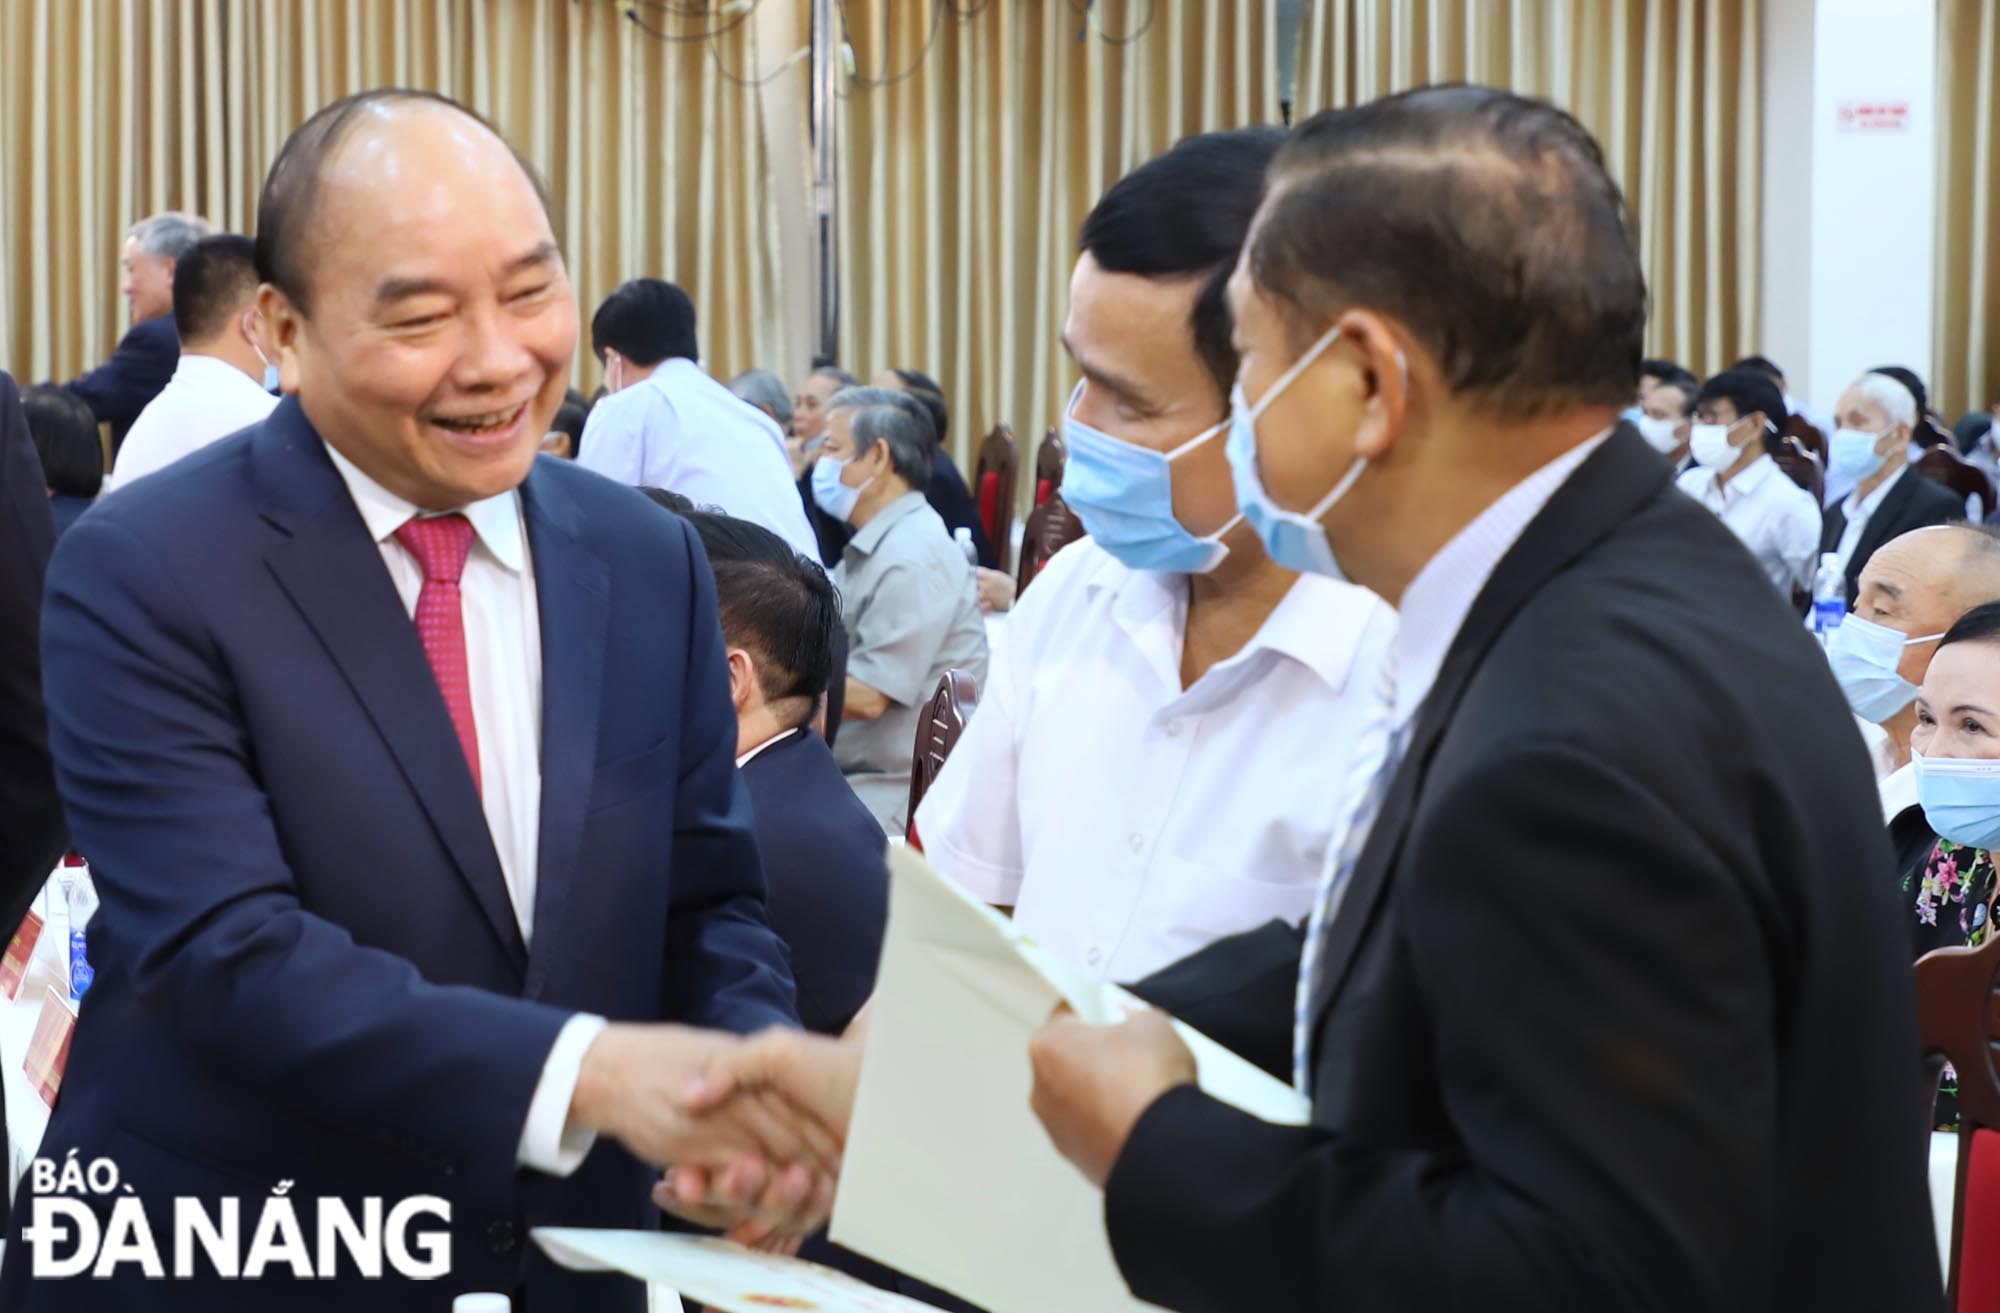 President Nguyen Xuan Phuc (left) presenting a gift to a retired senior cadre in Central Viet Nam. Photo: NGOC PHU